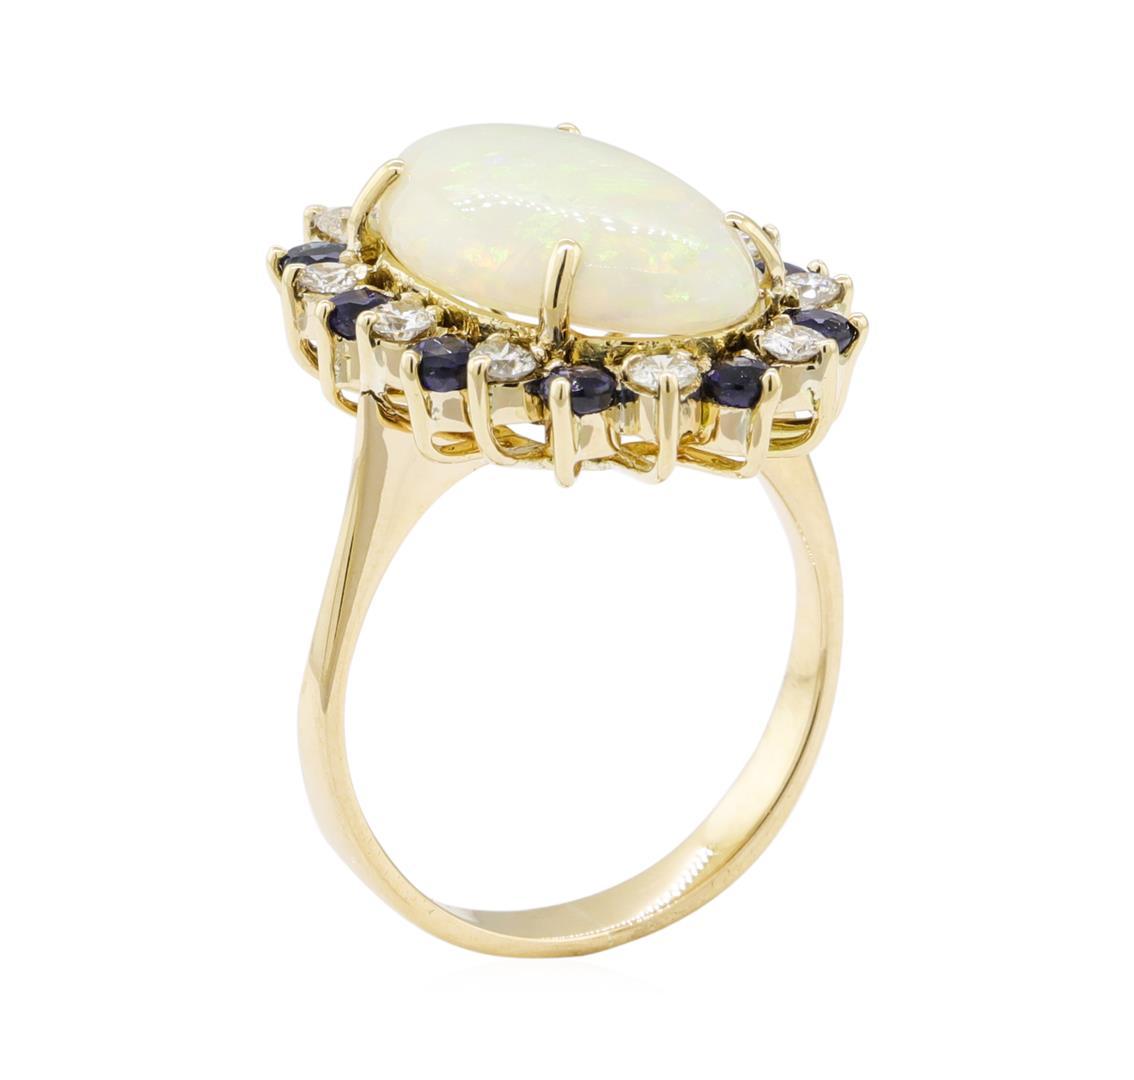 4.80 ctw Opal, Sapphire, and Diamond Ring - 14KT Yellow Gold